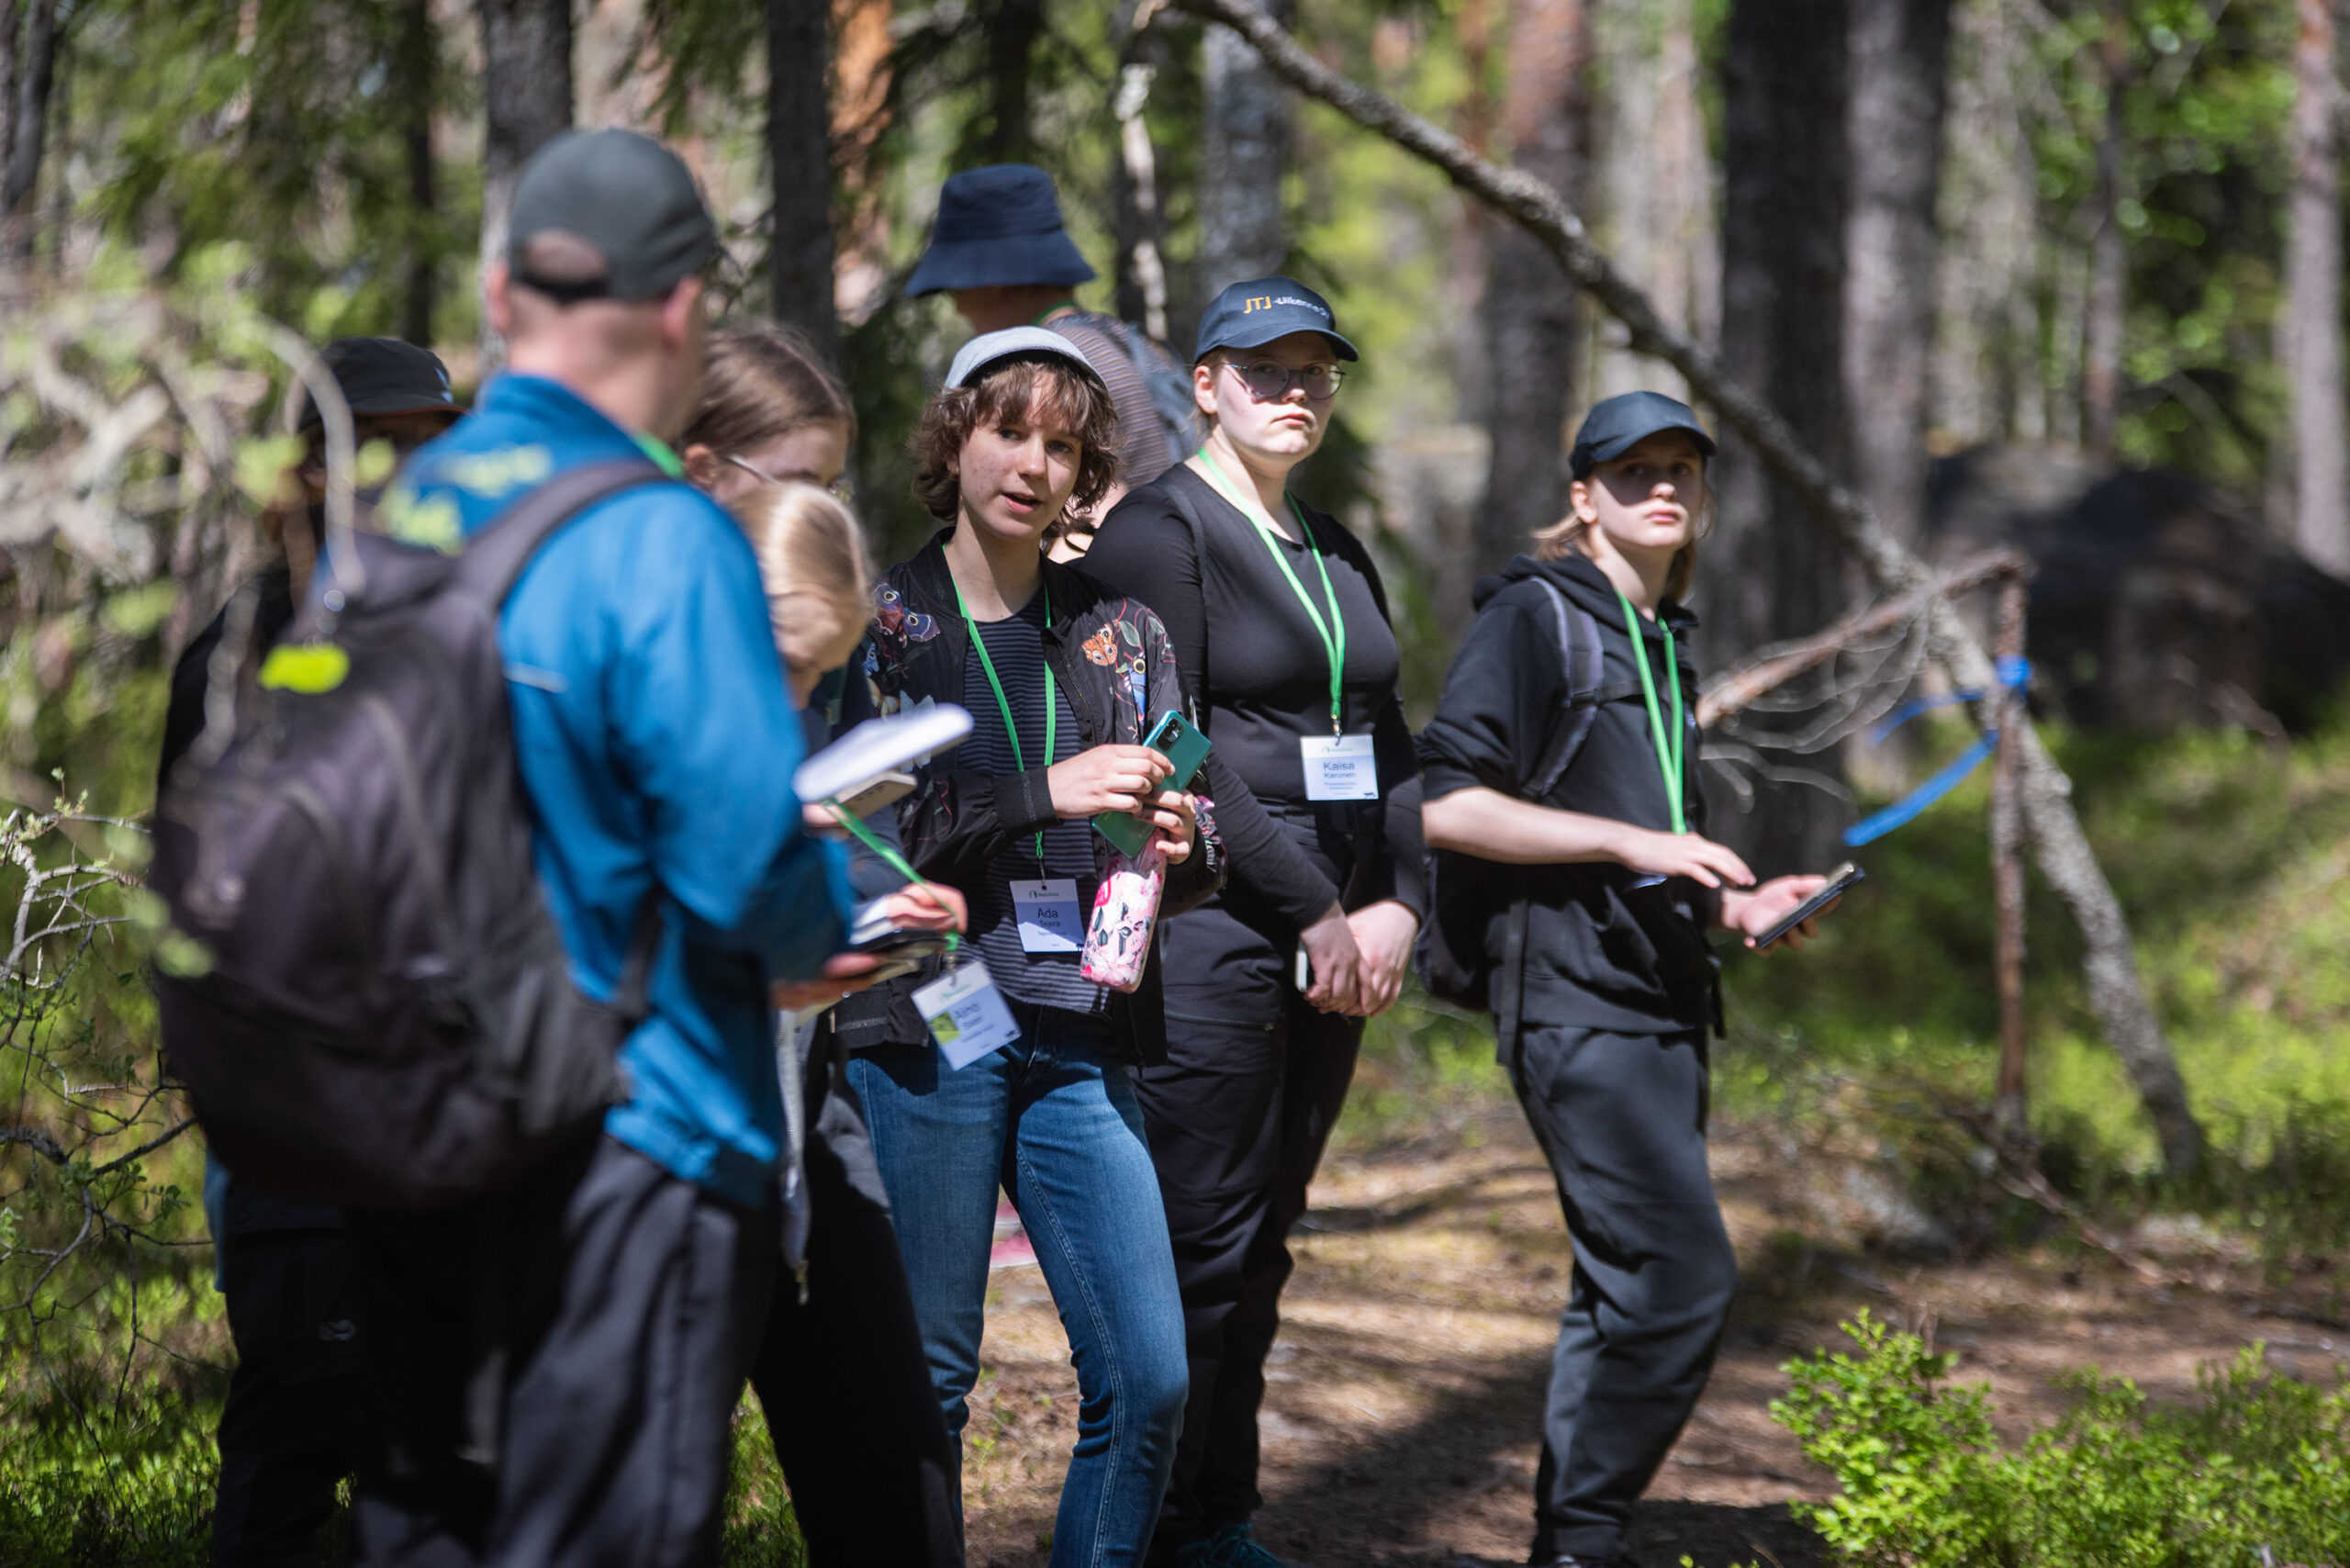 Forest Quiz participants in Finland